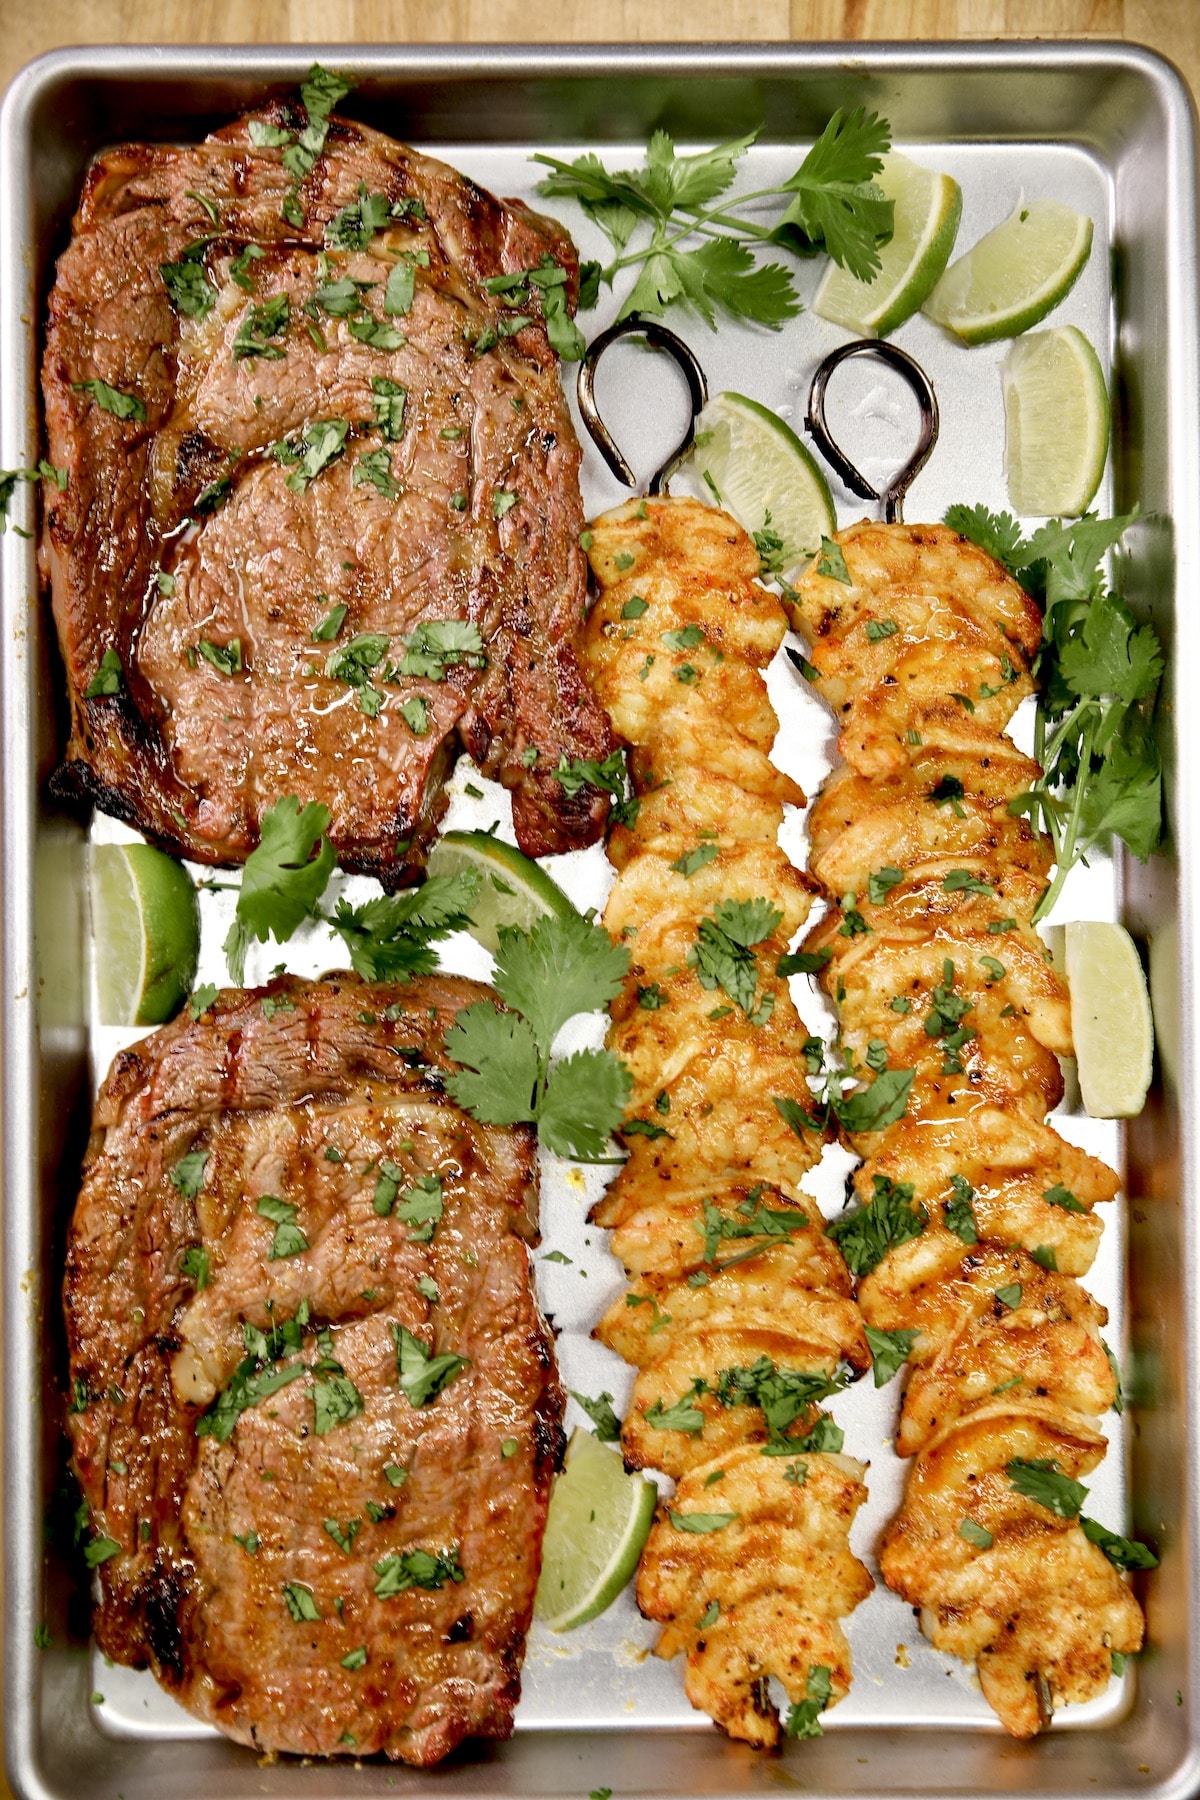 Grilled steaks and shrimp skewers with cilantro and lime on sheet pan.